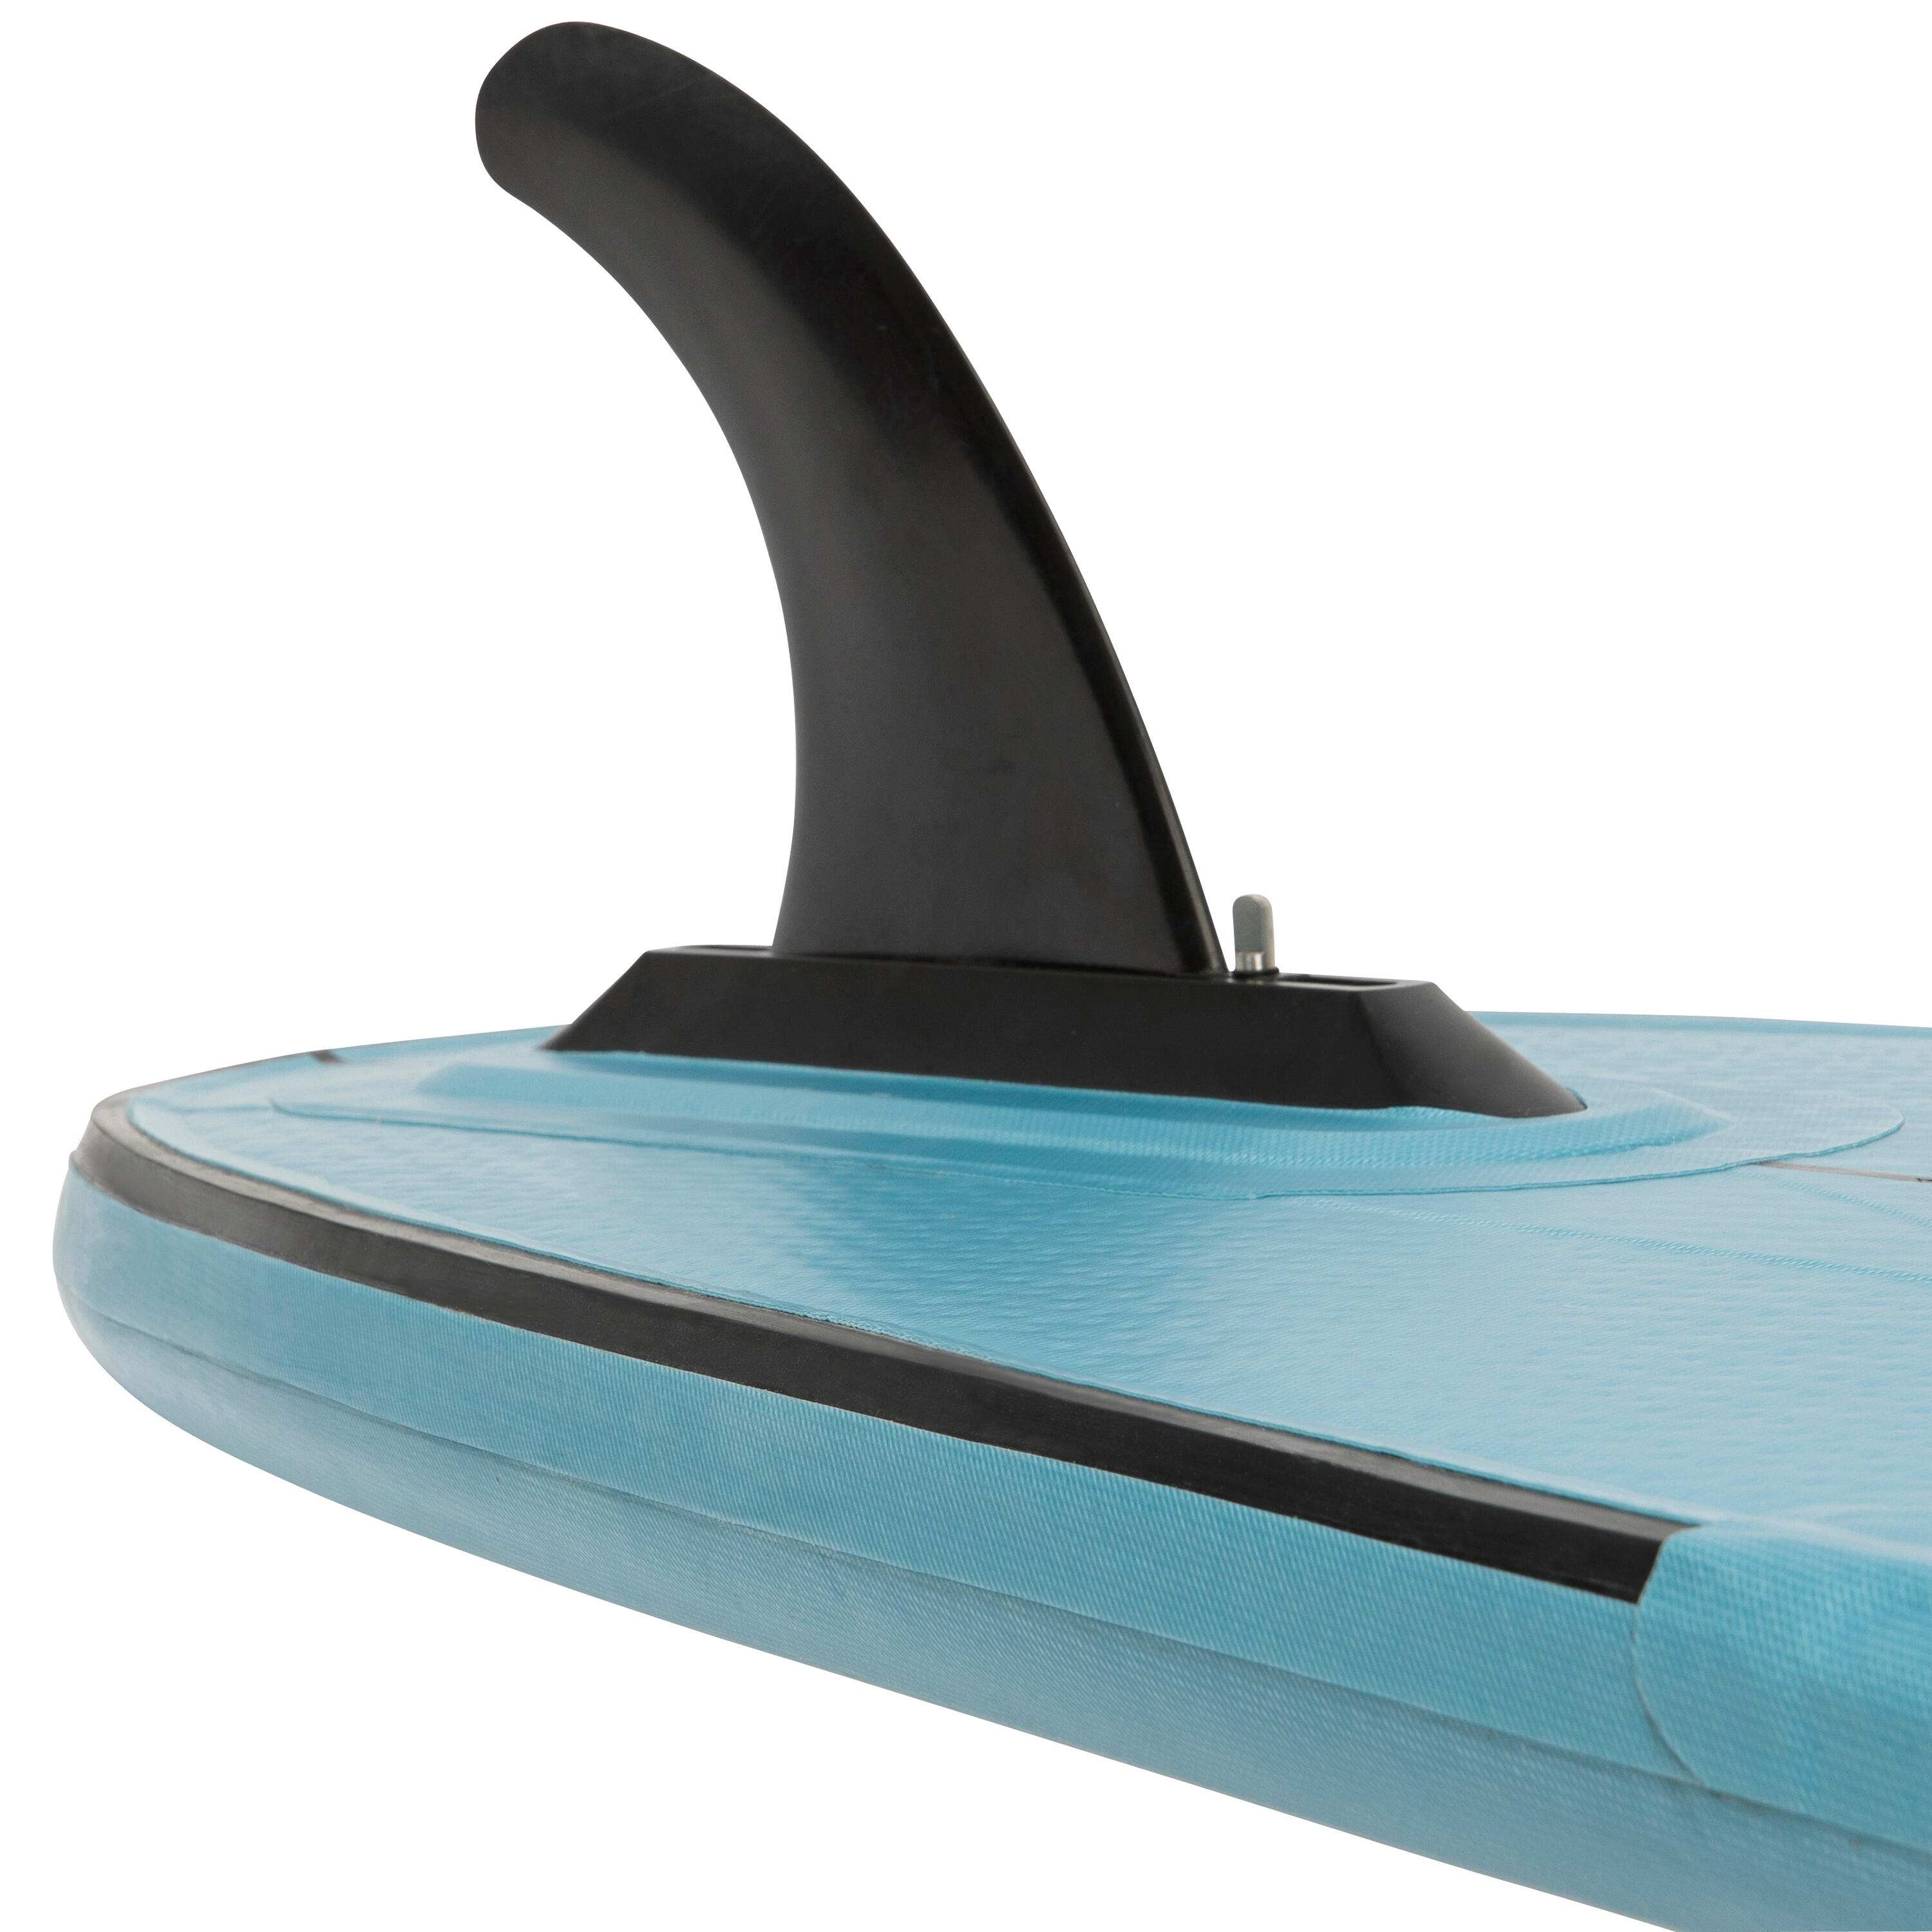 6'6 Inflatable Surfboard - Compact 500 Blue - Snow white - Olaian